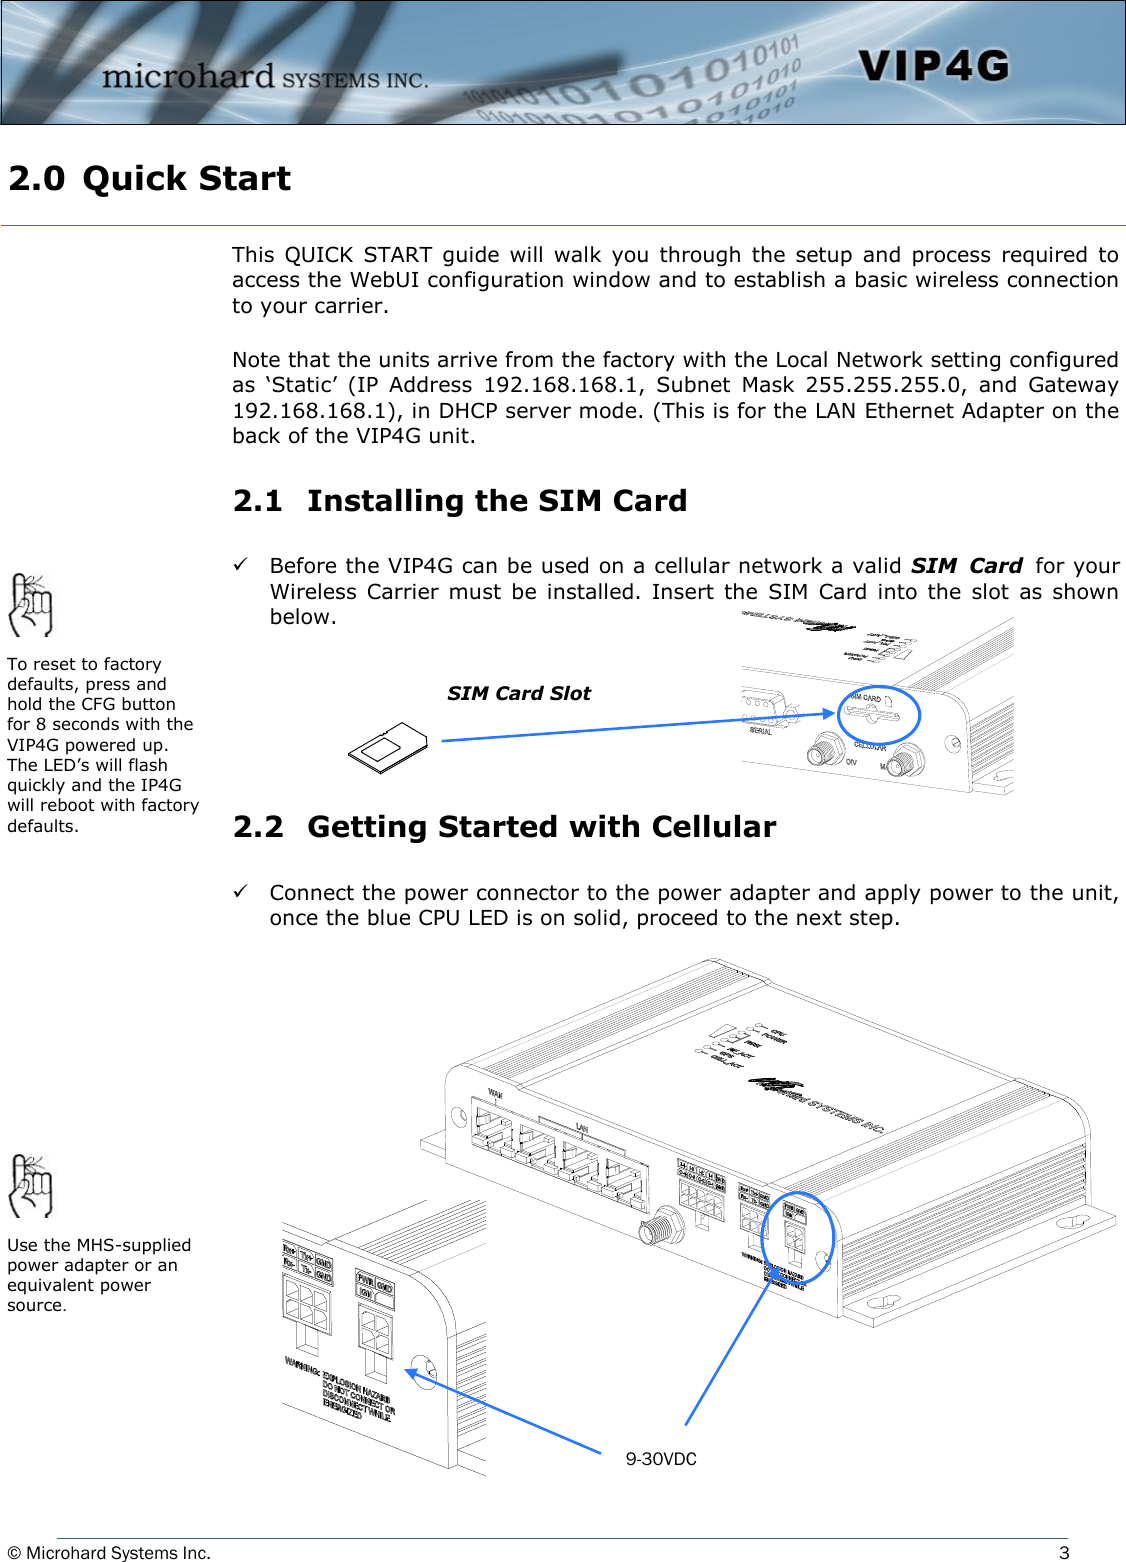 © Microhard Systems Inc.          3 2.0  Quick Start  This  QUICK  START  guide will  walk  you through  the  setup  and  process  required  to access the WebUI configuration window and to establish a basic wireless connection to your carrier.  Note that the units arrive from the factory with the Local Network setting configured as  ‘Static’  (IP  Address  192.168.168.1,  Subnet  Mask  255.255.255.0,  and  Gateway 192.168.168.1), in DHCP server mode. (This is for the LAN Ethernet Adapter on the back of the VIP4G unit.  2.1   Installing the SIM Card    Before the VIP4G can be used on a cellular network a valid SIM  Card for your Wireless  Carrier  must  be  installed.  Insert  the  SIM  Card  into  the  slot  as  shown below.       2.2   Getting Started with Cellular    Connect the power connector to the power adapter and apply power to the unit, once the blue CPU LED is on solid, proceed to the next step.        SIM Card Slot To reset to factory defaults, press and hold the CFG button for 8 seconds with the VIP4G powered up. The LED’s will flash quickly and the IP4G will reboot with factory defaults. Use the MHS-supplied power adapter or an equivalent power source. 9-30VDC 